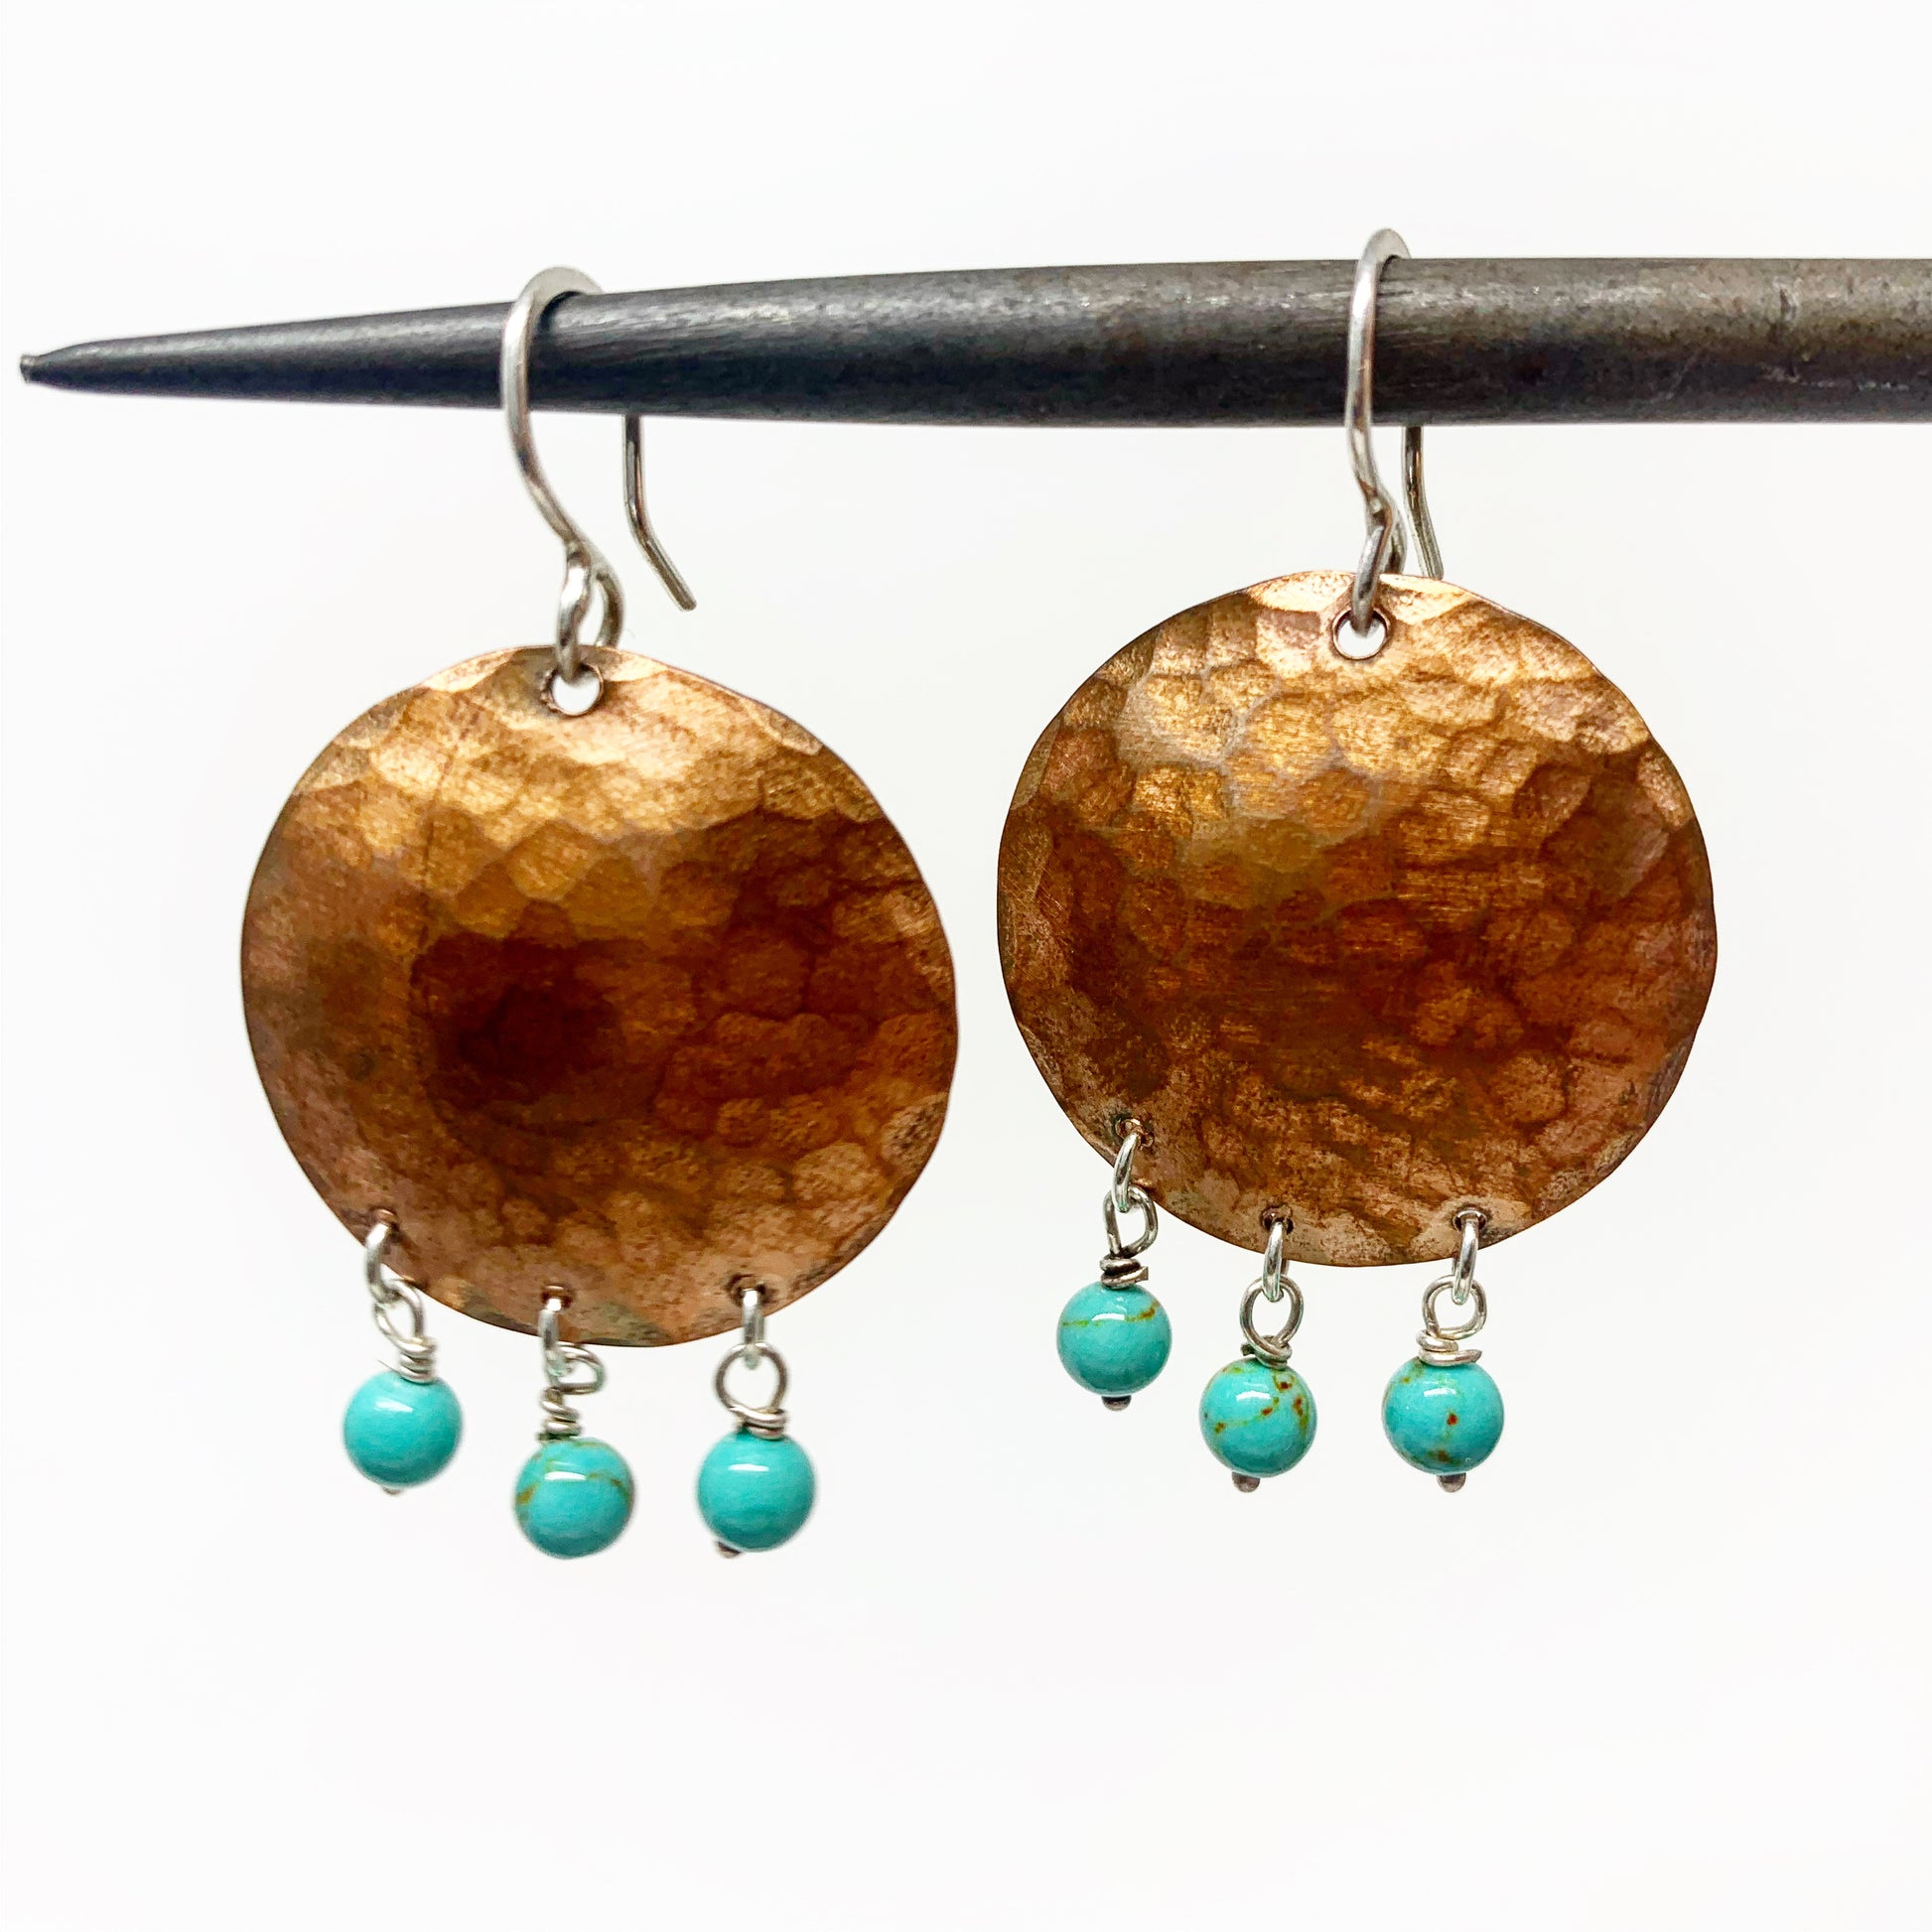 Full Moon Earrings with Turquoise Drops - Jennifer Cervelli Jewelry